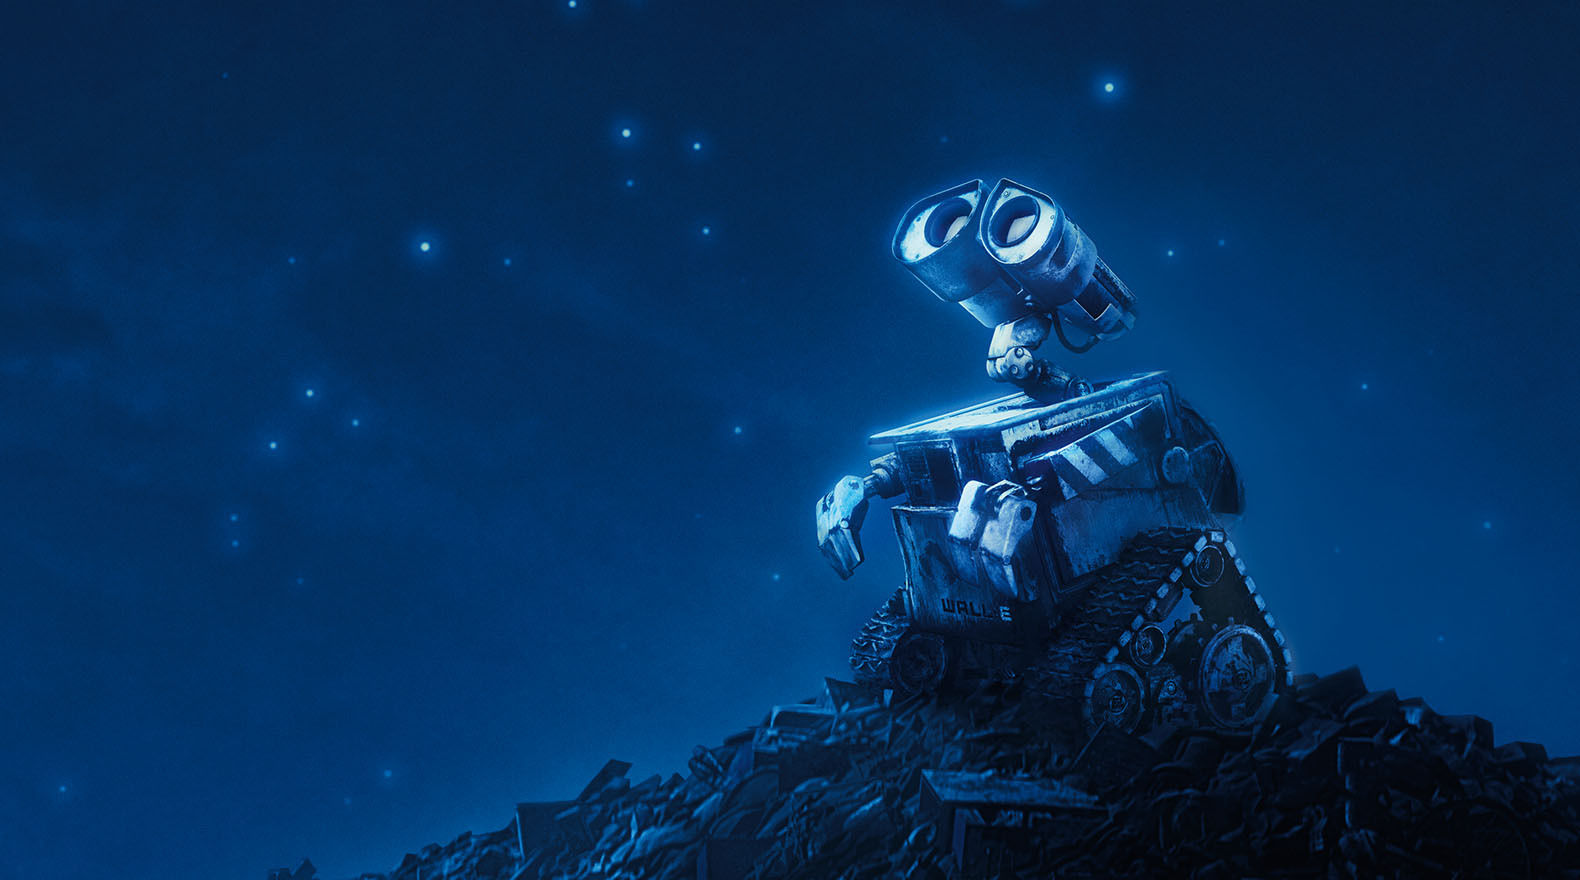 Wall·E Backgrounds, Compatible - PC, Mobile, Gadgets| 1580x880 px